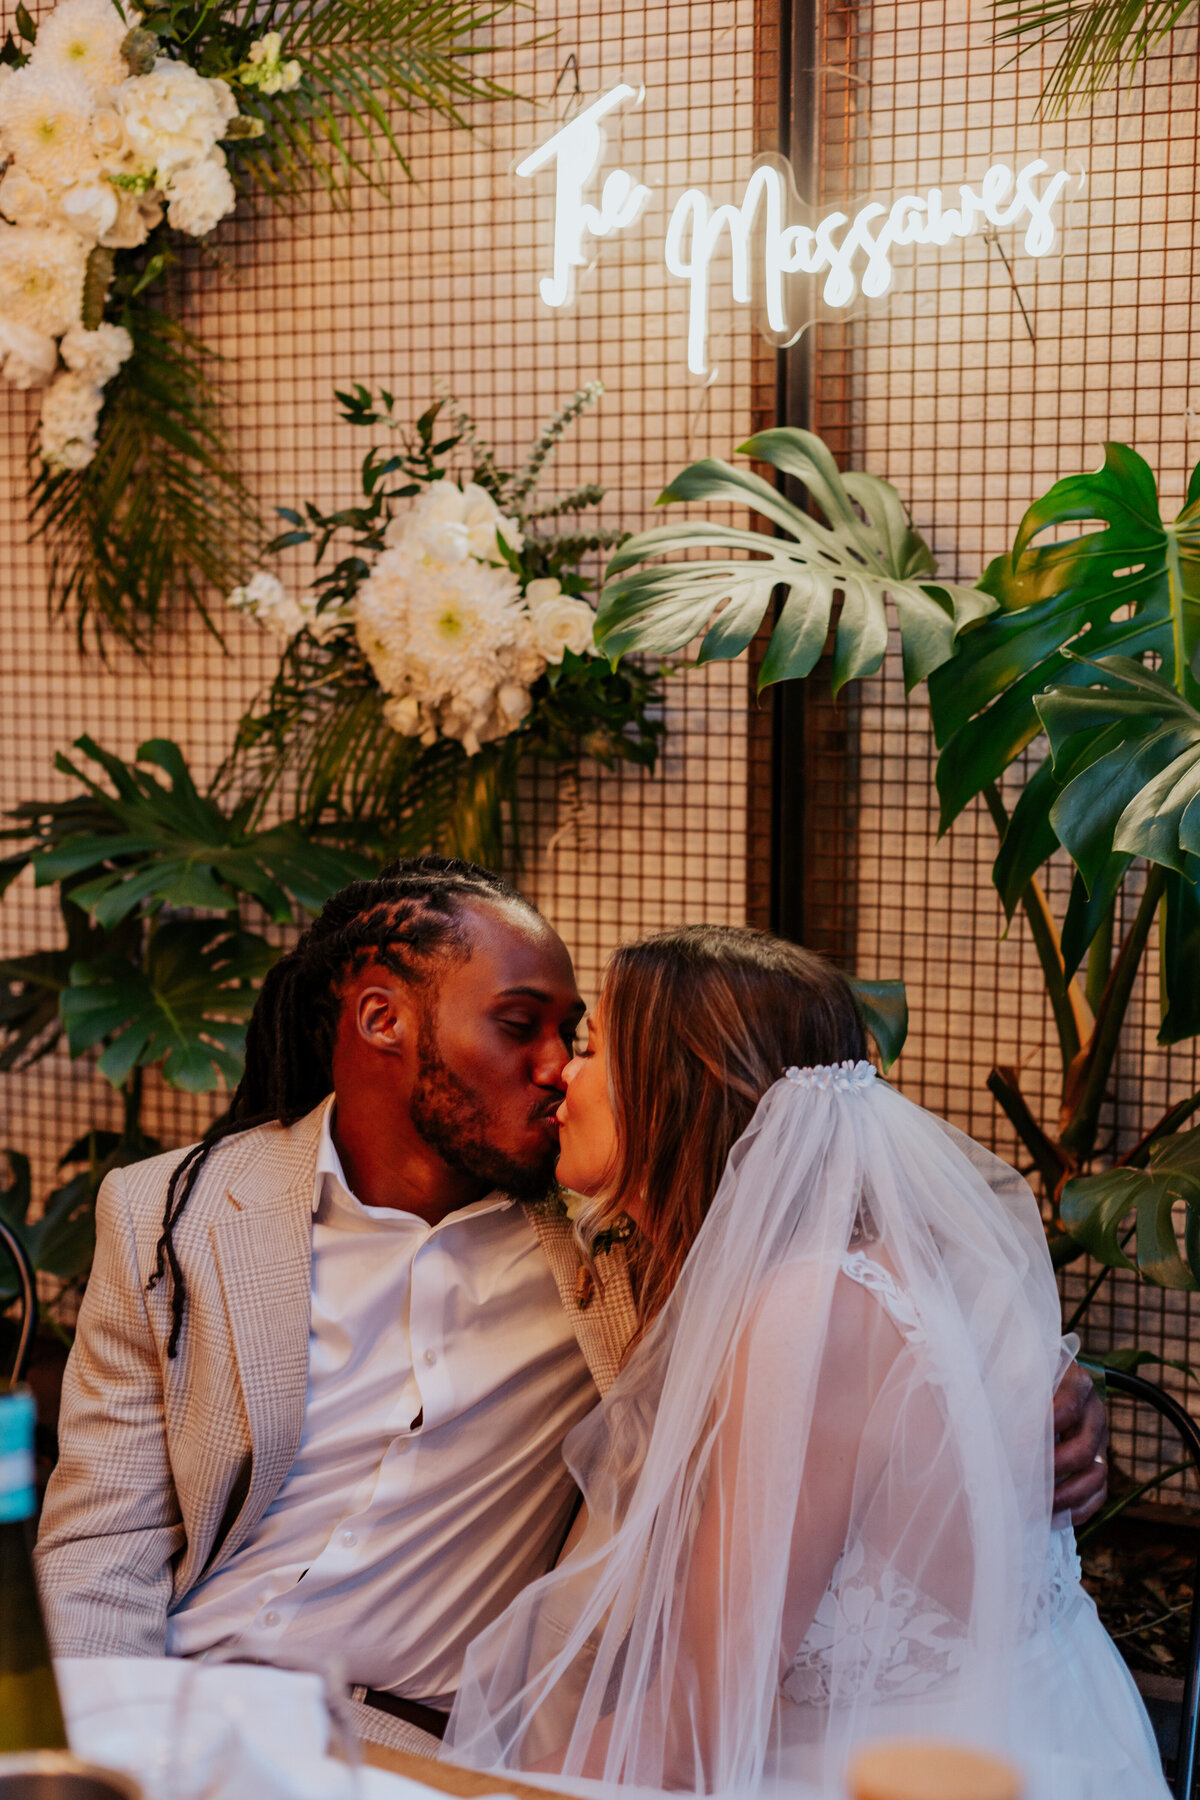 Bride and groom kiss infront of a backdrop of plants and a neon sign that says 'The Massawes'